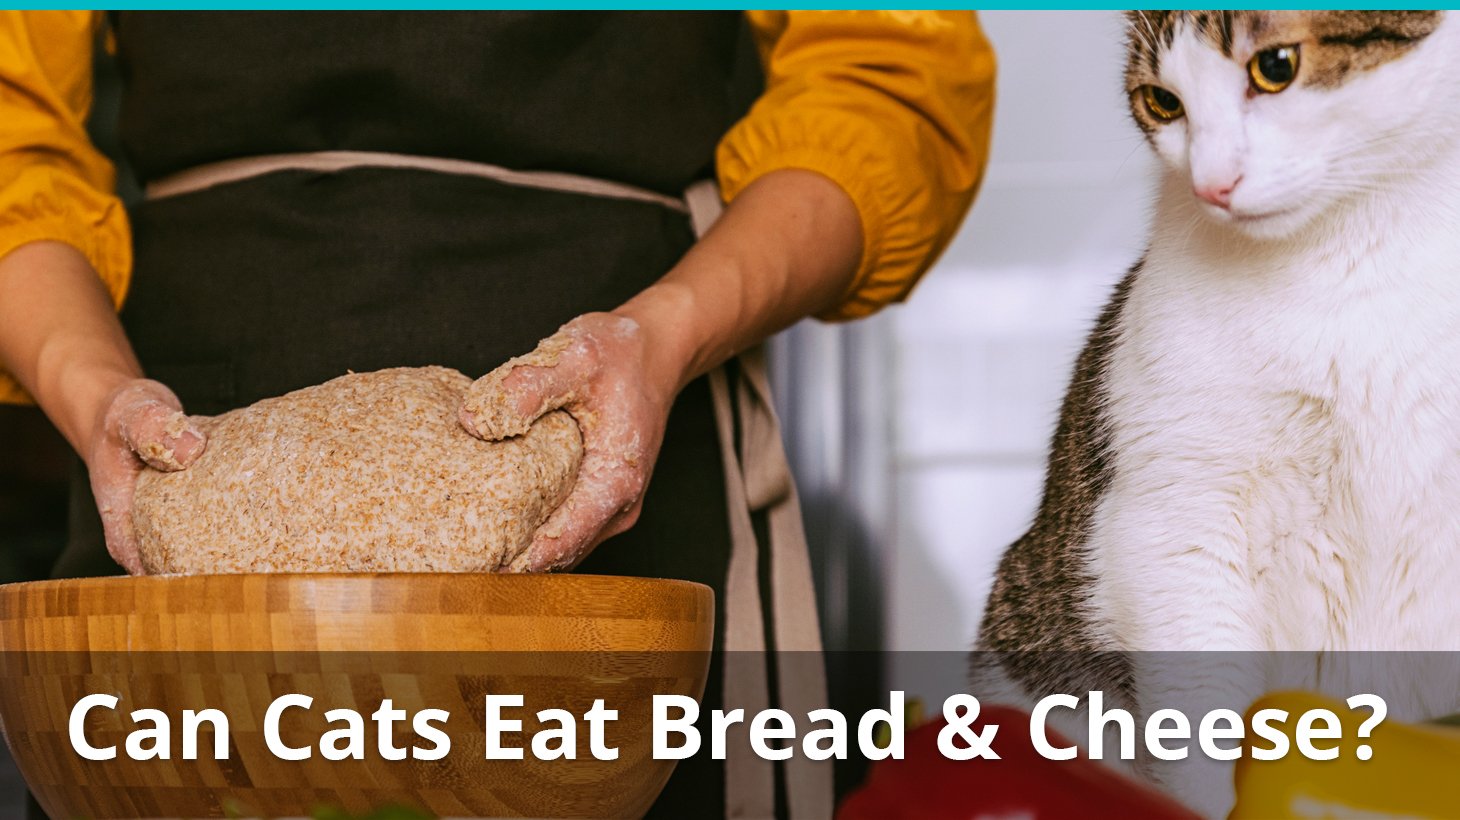 Can Cats Eat Cheese Or Bread? Is It Safe Or Bad For Them?